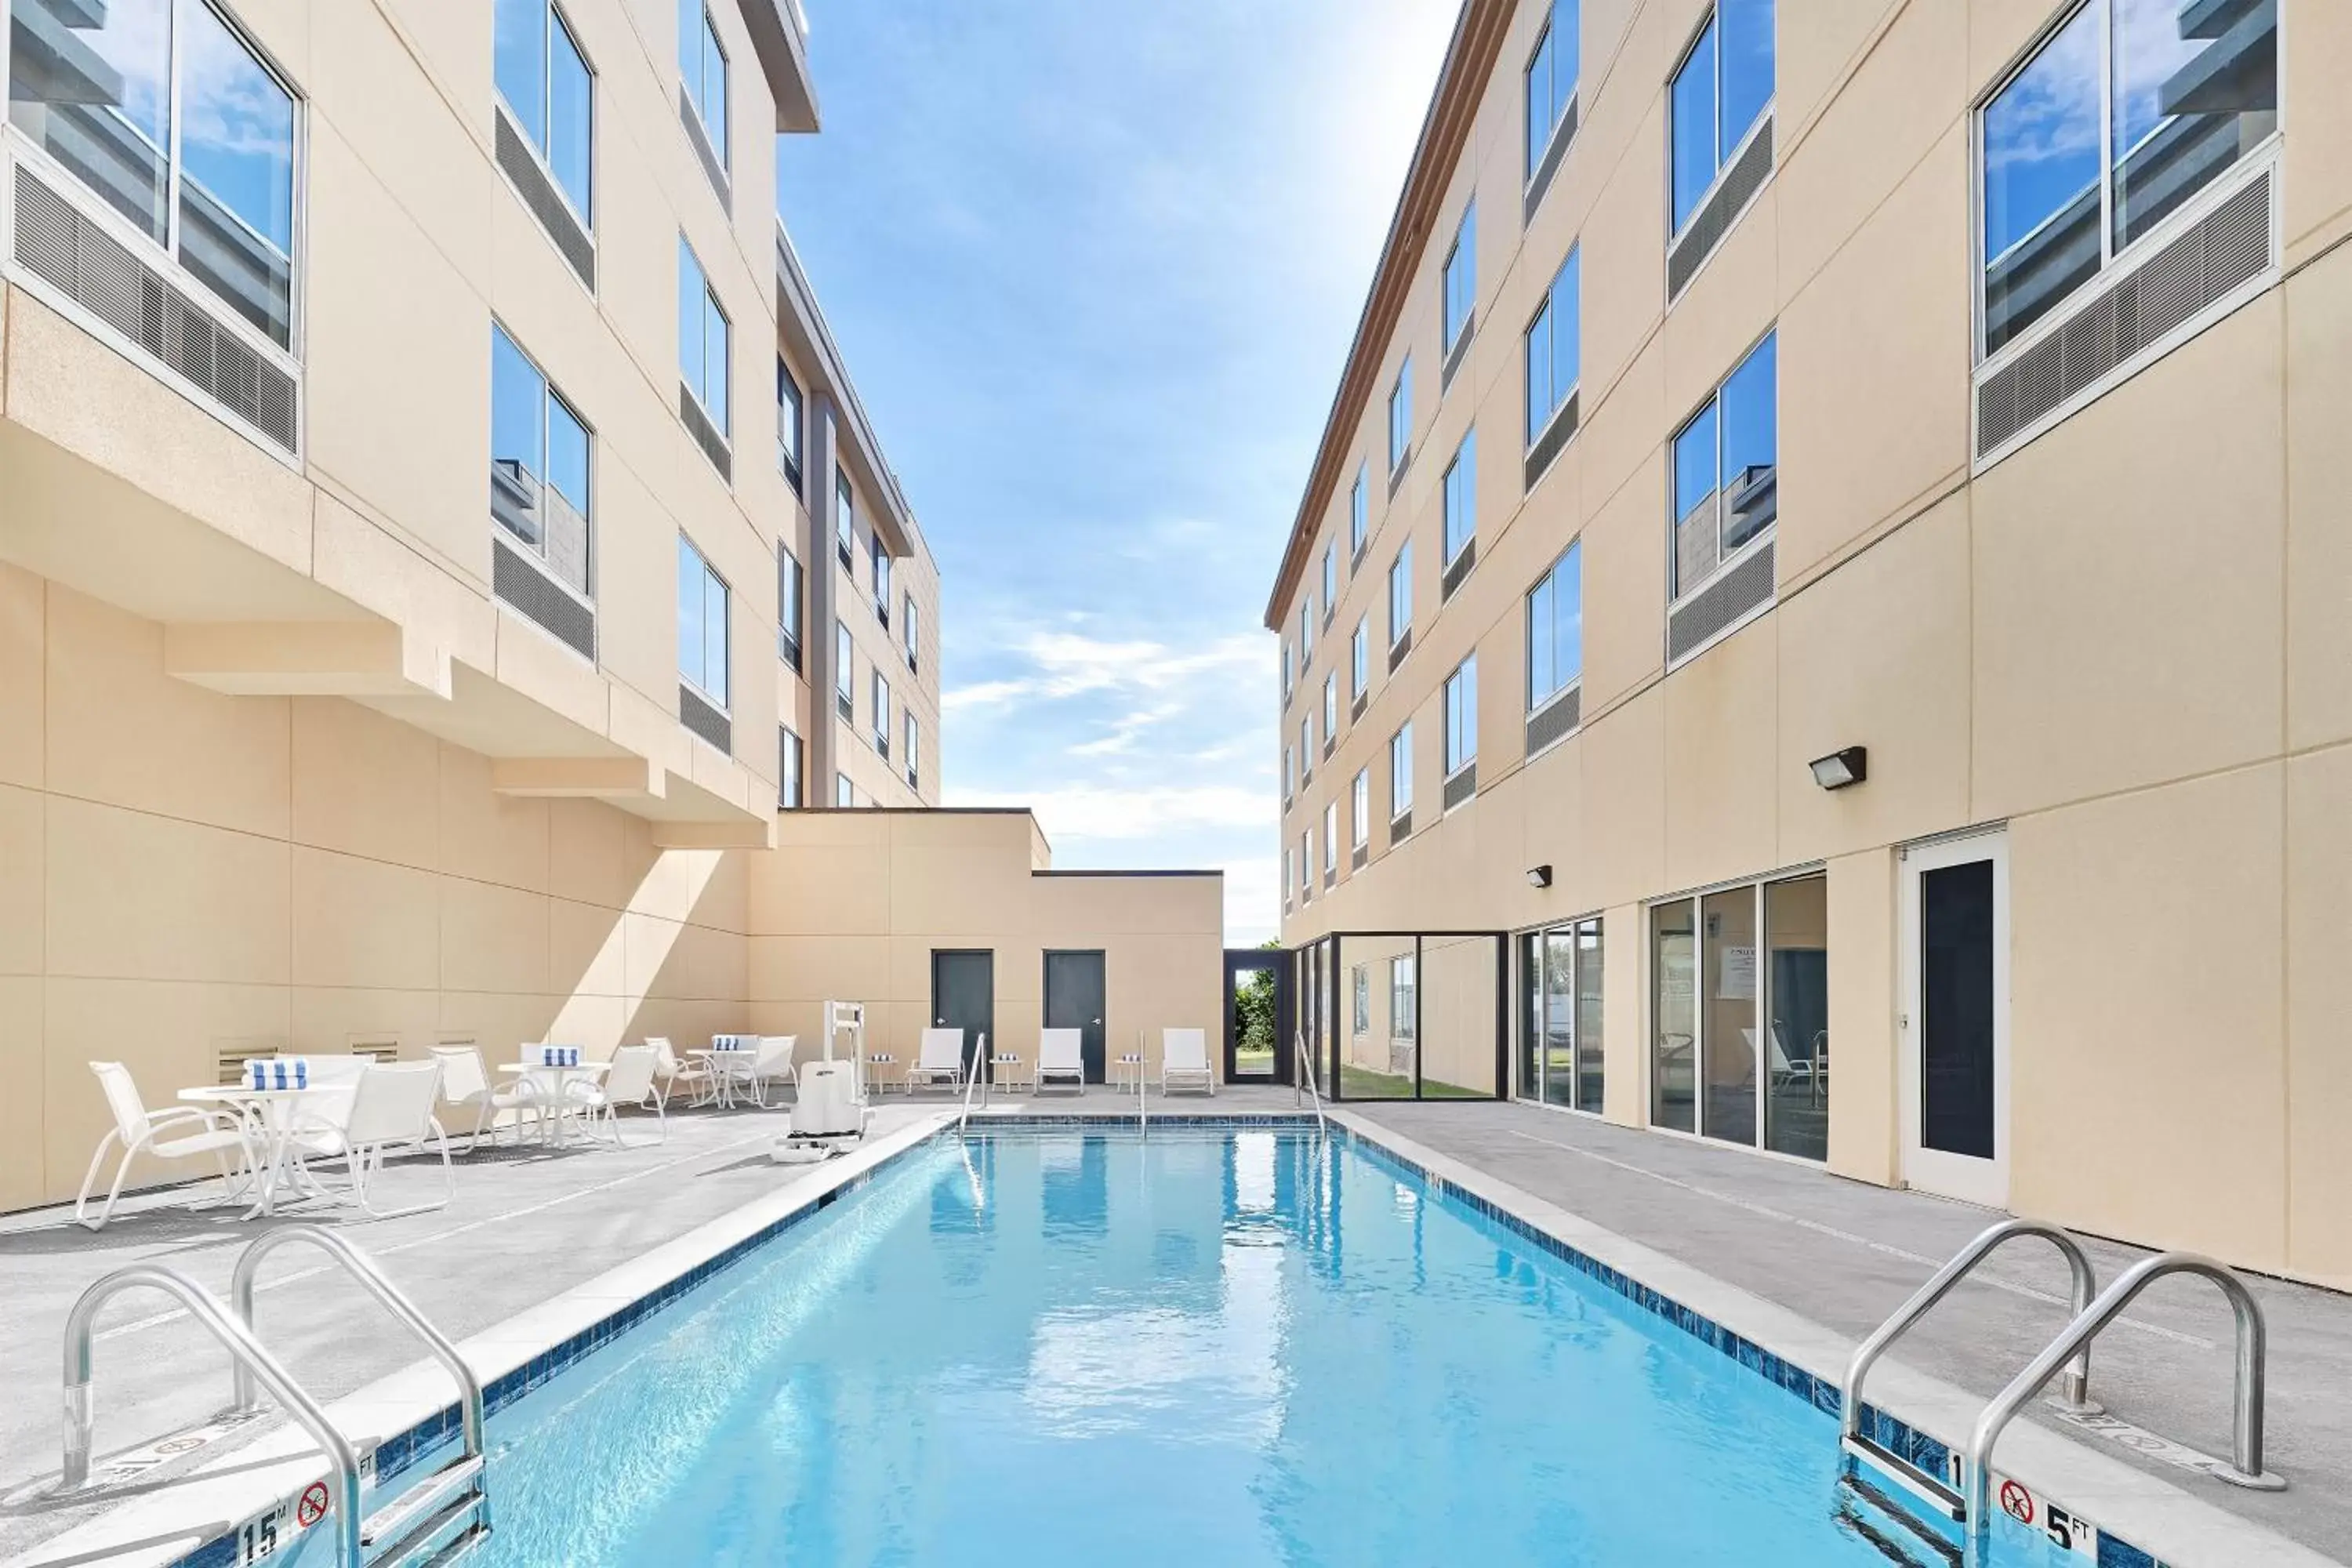 Swimming Pool in Four Points by Sheraton Oklahoma City Airport